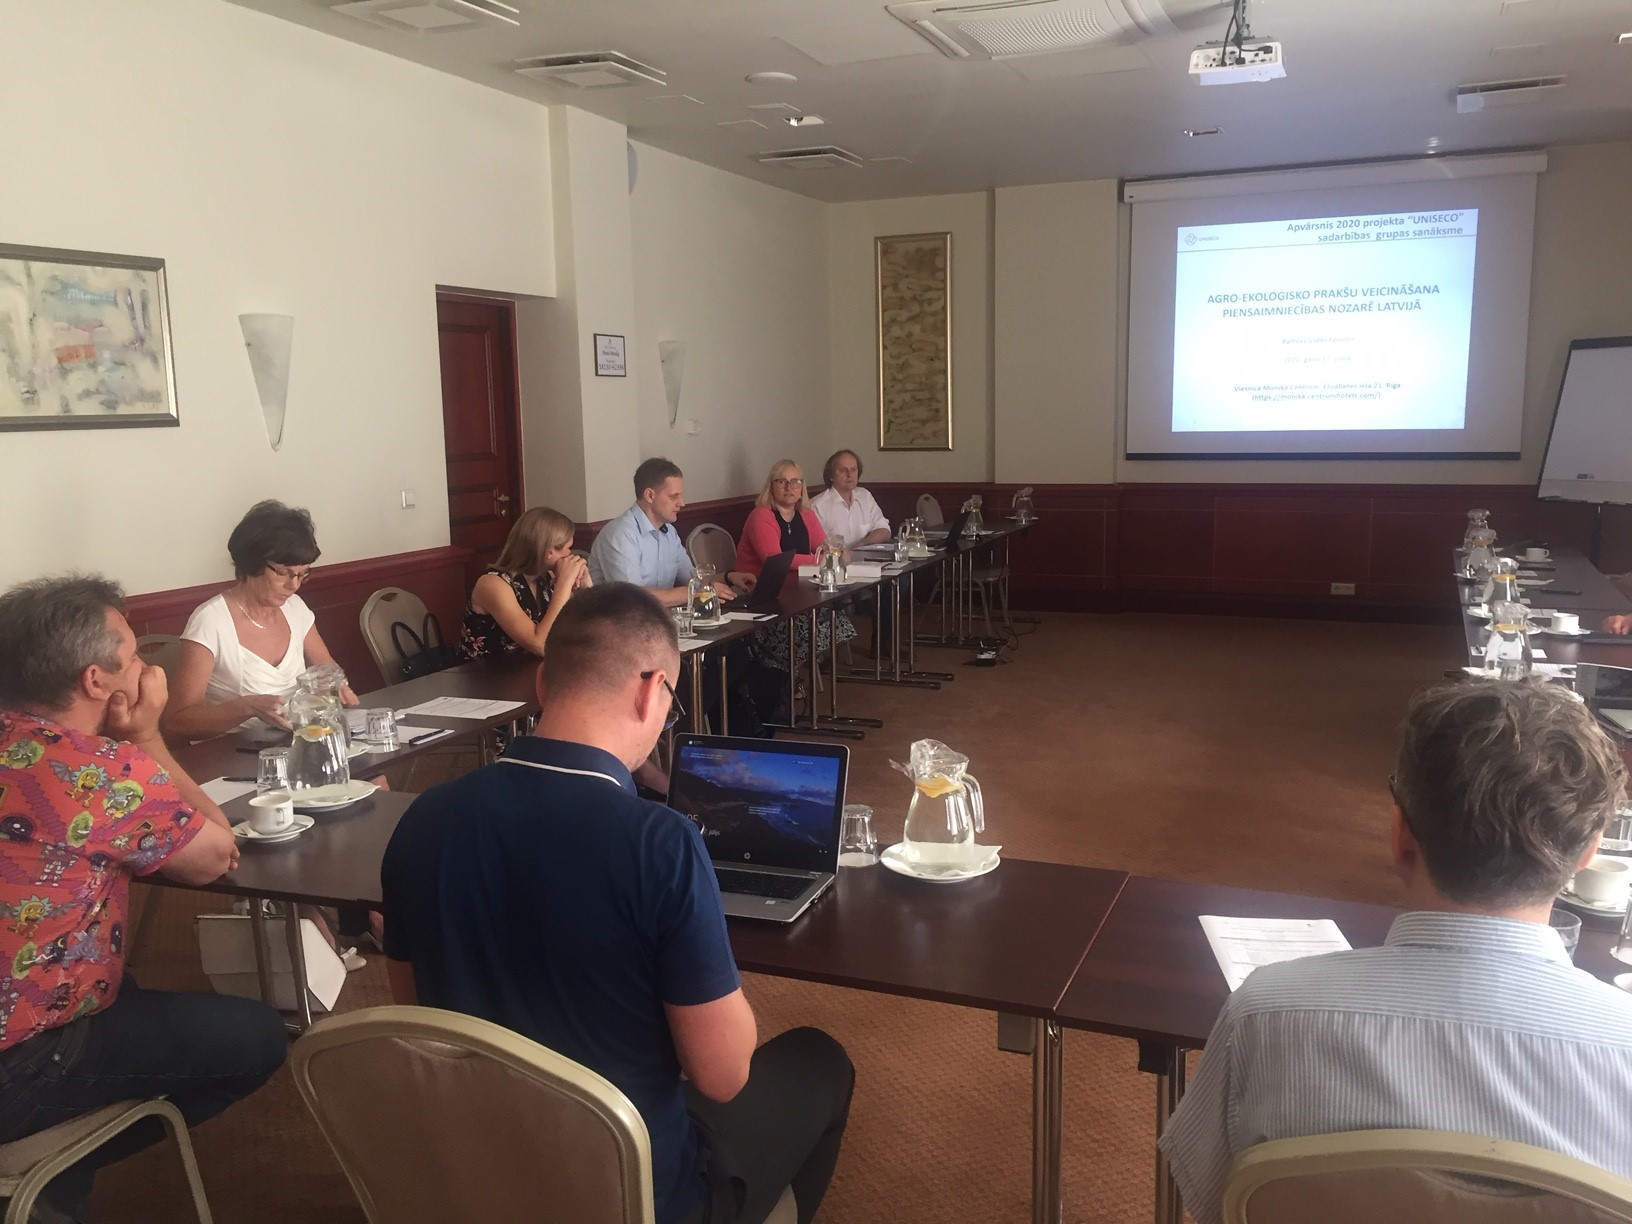 LV CASE STUDY: ROUNDTABLE DISCUSSION ON STRENGTHENING THE TRANSITION TO GRASS-BASED ORGANIC DAIRY FARMING IN LATVIA